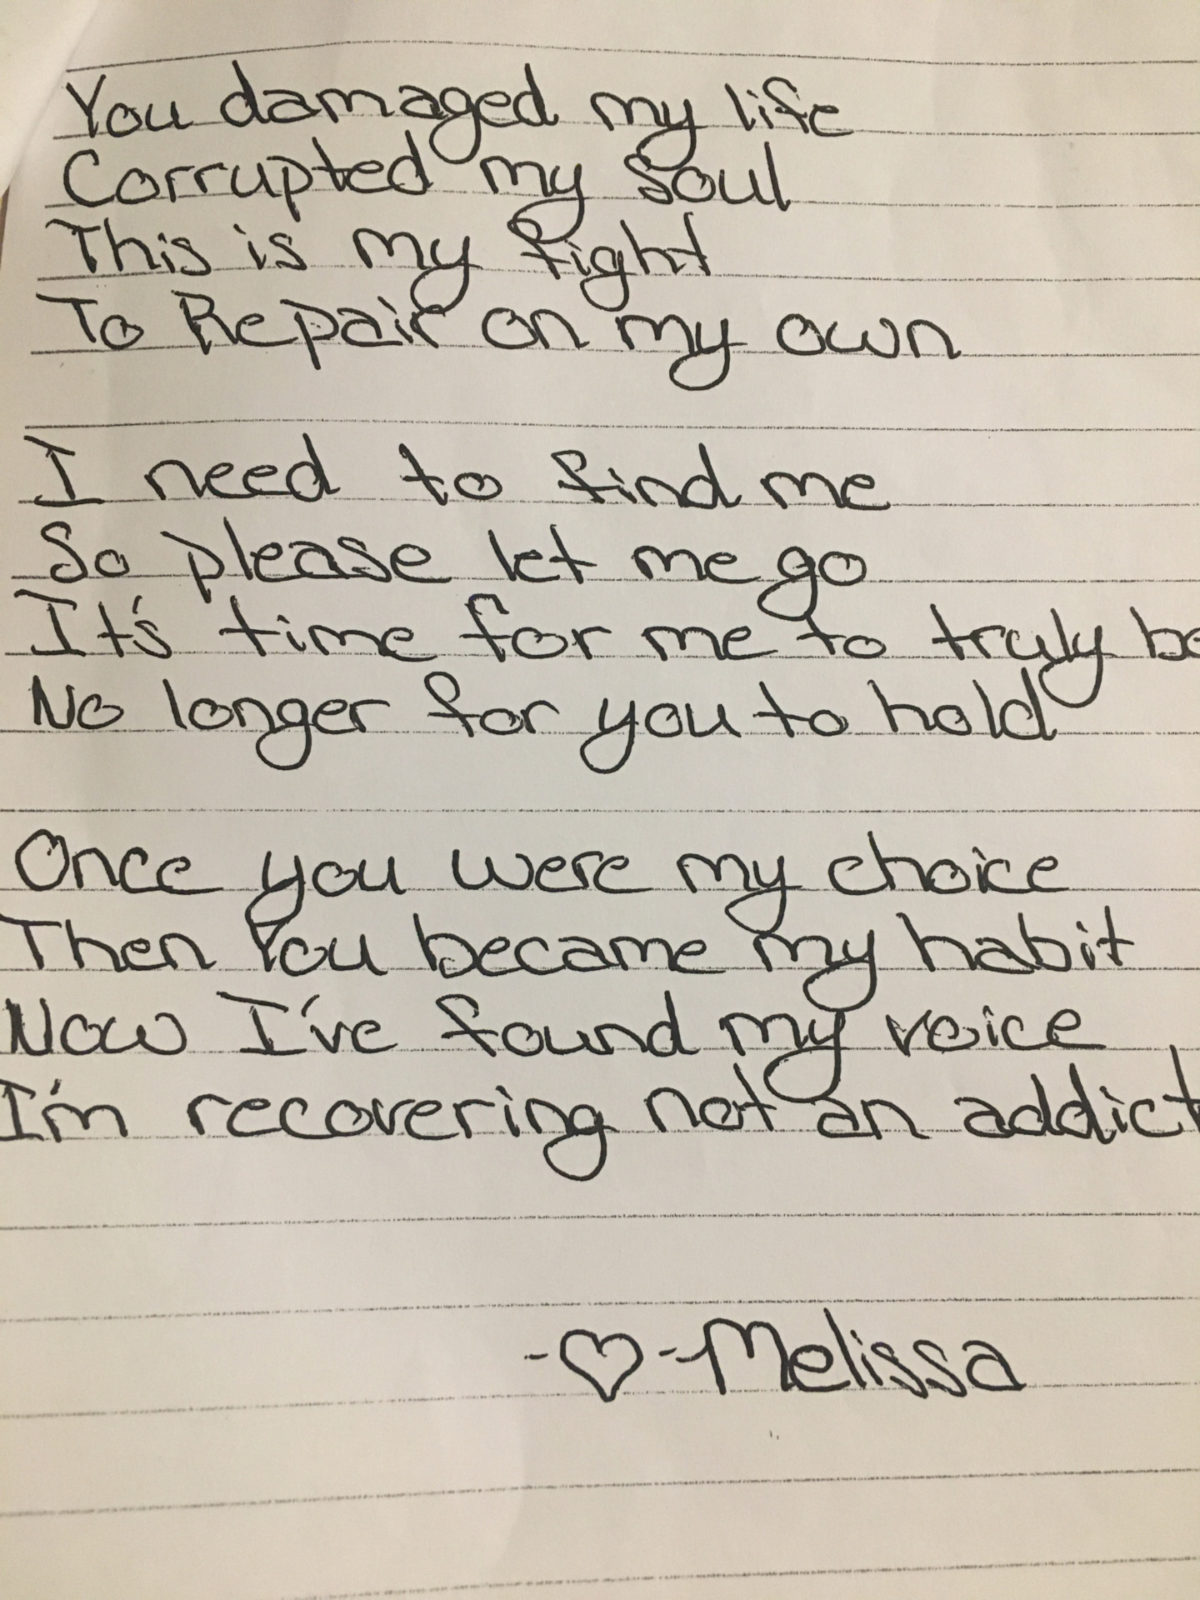 This image portrays Dear Meth by Addiction Poetry.